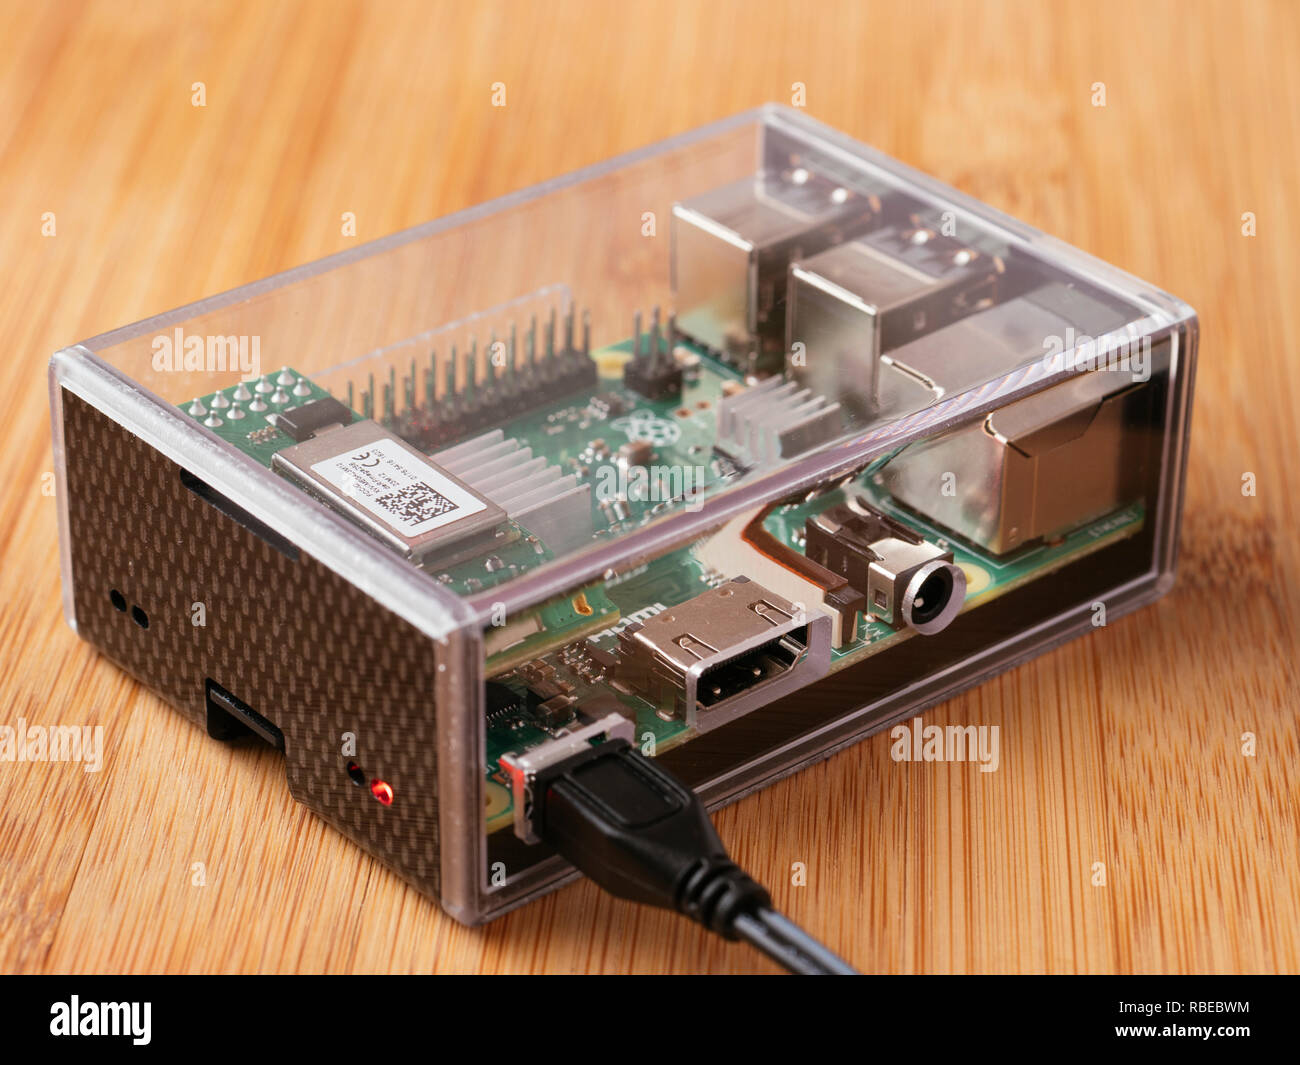 Raspberry Pi 3 Model B+ with ZigBee add-on board in a transparent case. Stock Photo